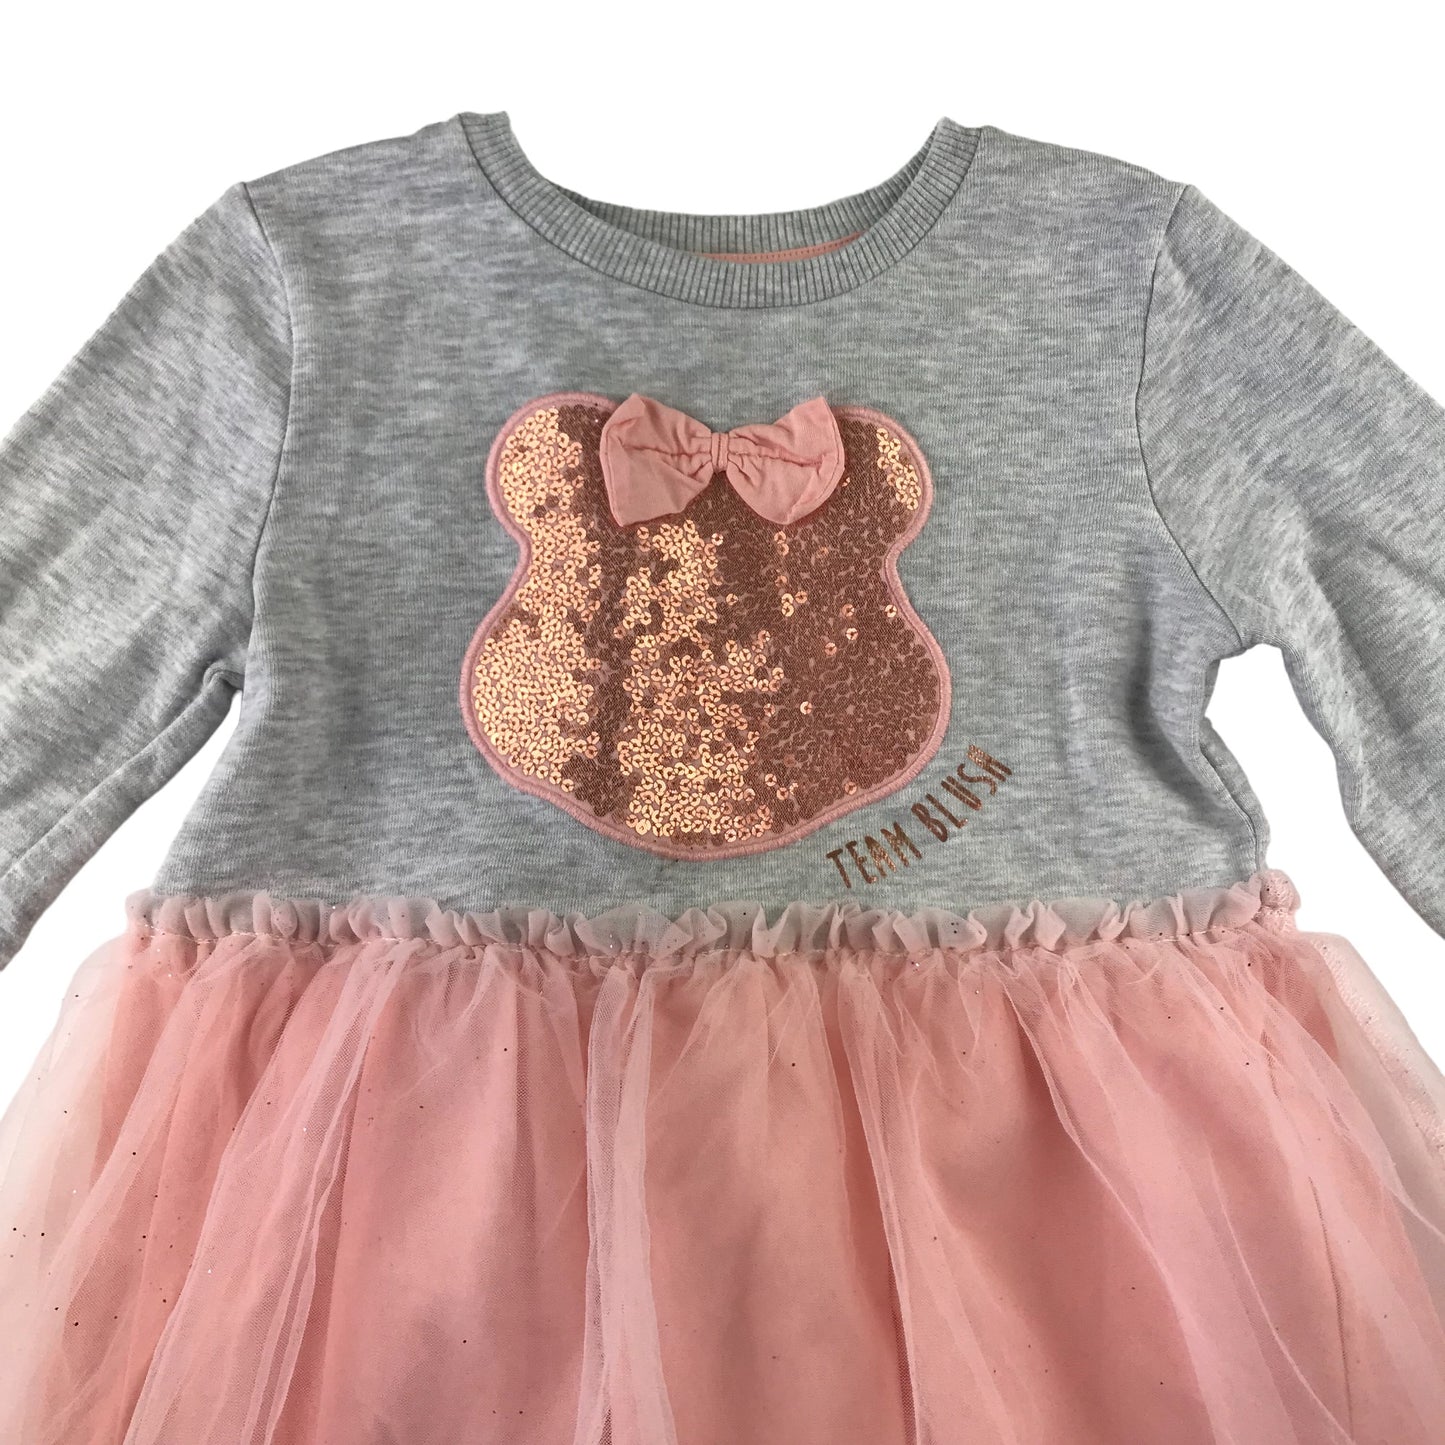 George dress 5-6 years grey and pink jersey top tulle skirt sequin bear